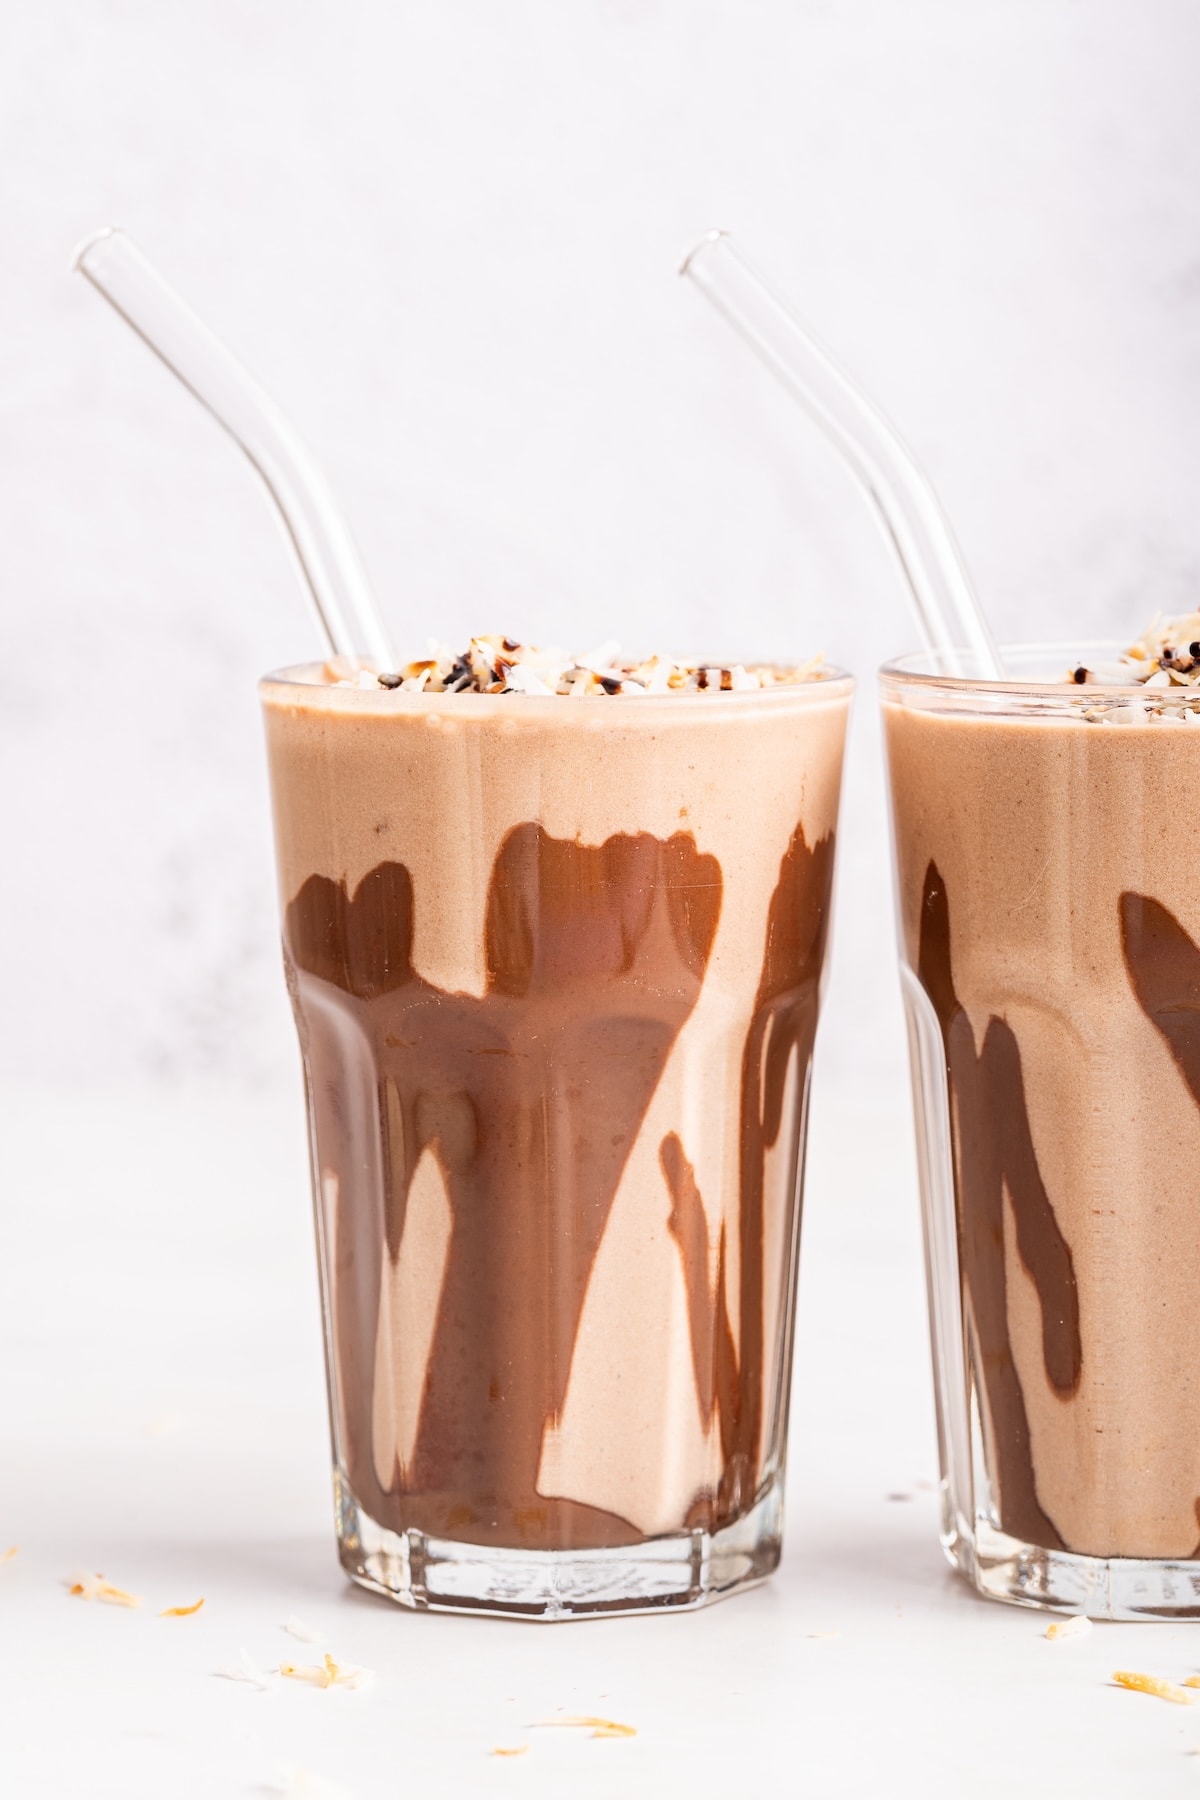 A samoa cookie protein shake in a glass that has drizzled chocolate around the sides.